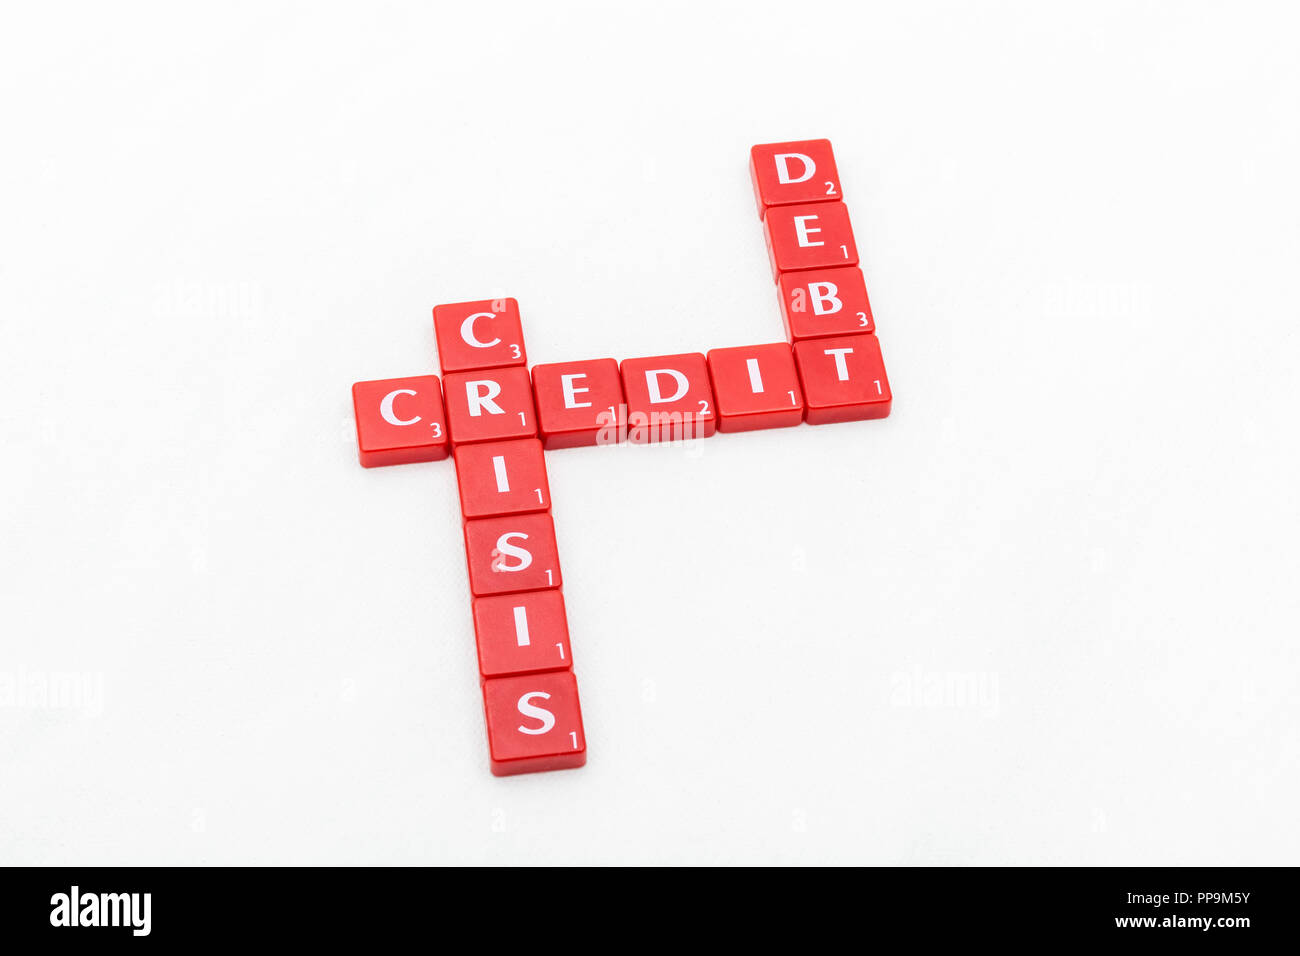 Letter tiles spelling out aspects of personal finances / financial management, financial crisis, running up bills, debts, personal loans etc. Stock Photo